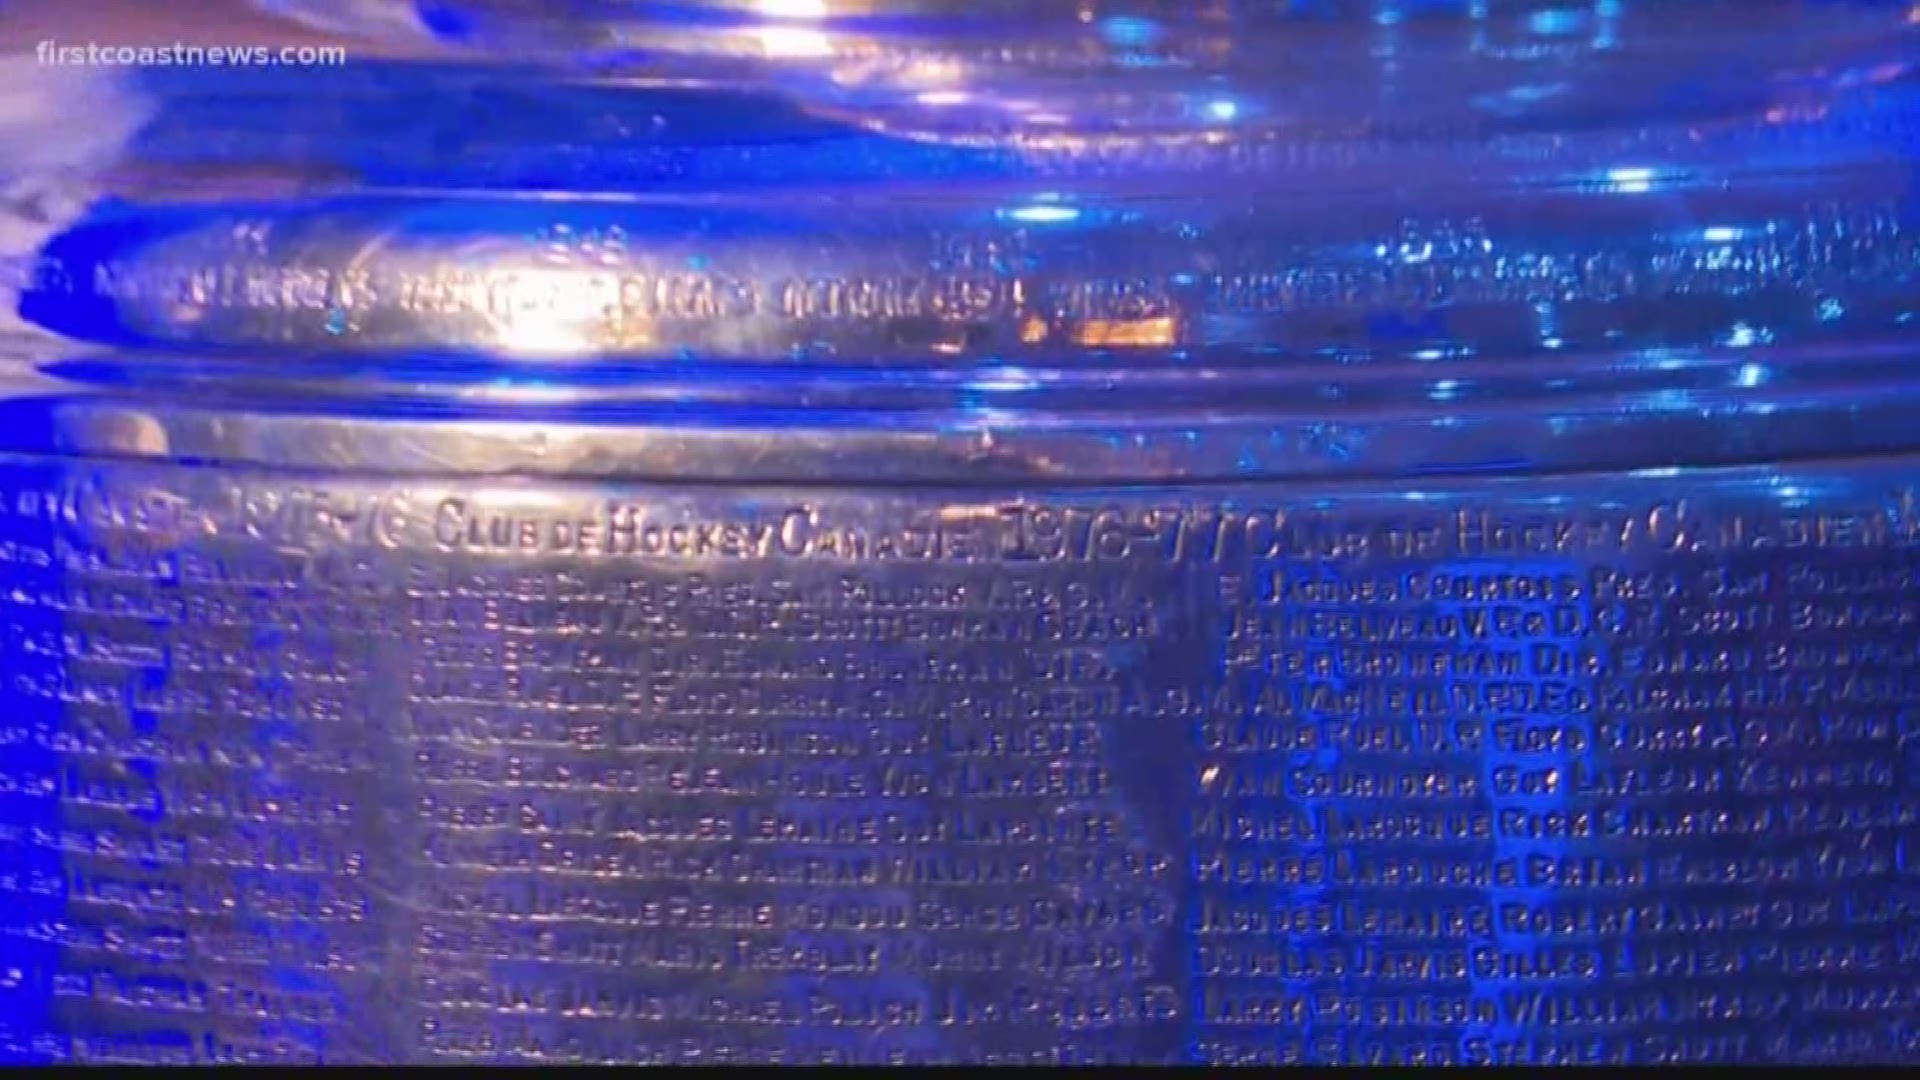 Blues assistant coach and St. Augustine resident Mike Van Ryn brought the Stanley Cup to the Oldest City in the Nation for the first time. Van Ryn and the Blues won the NHL title in June.